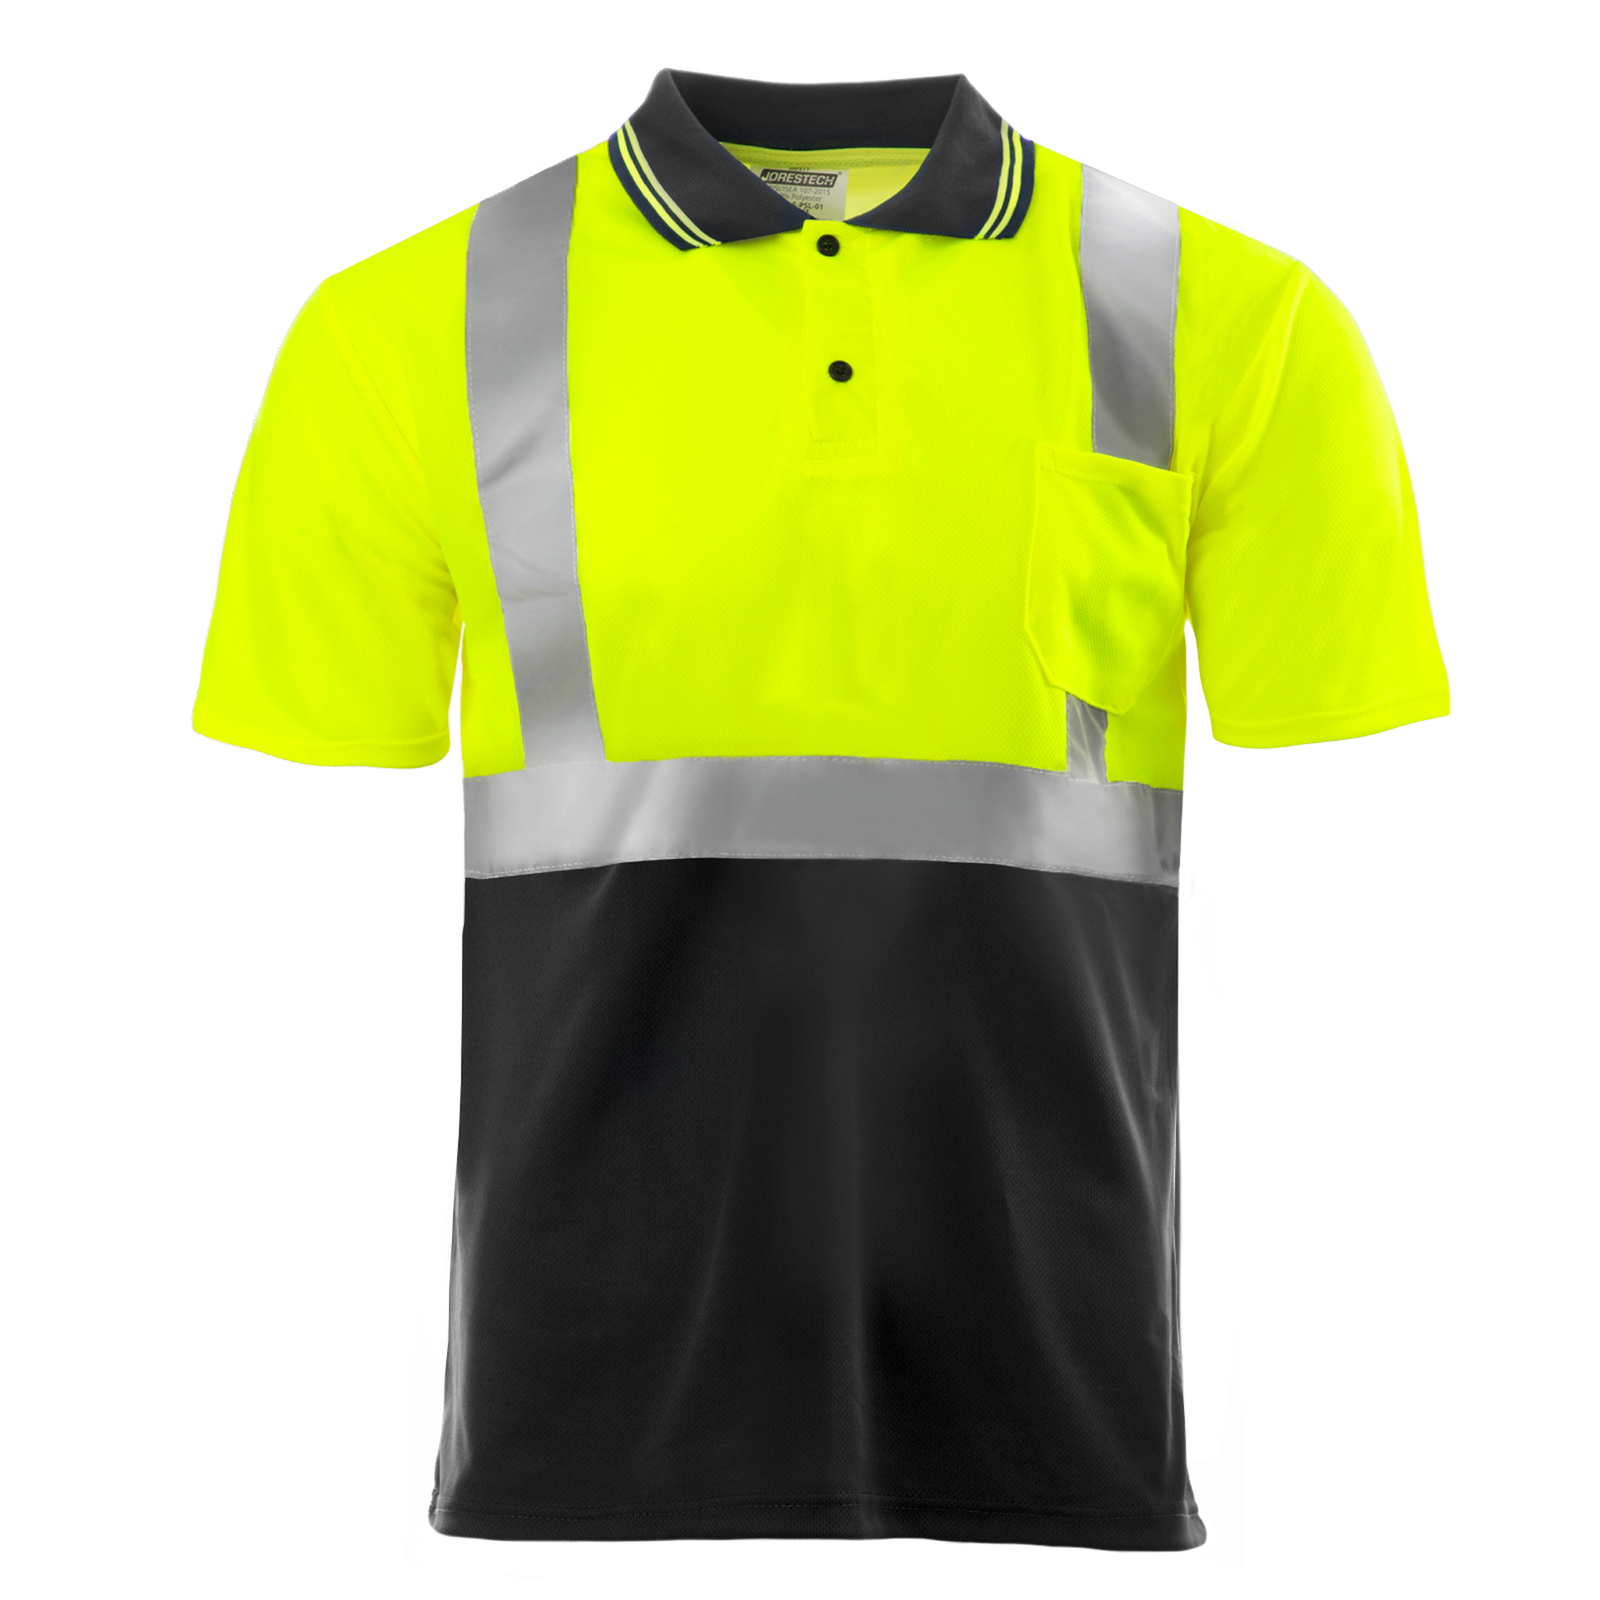 High vis yellow and black reflective safety polo shirt. The shirt is short sleeve, has a black collar and 2 buttons.